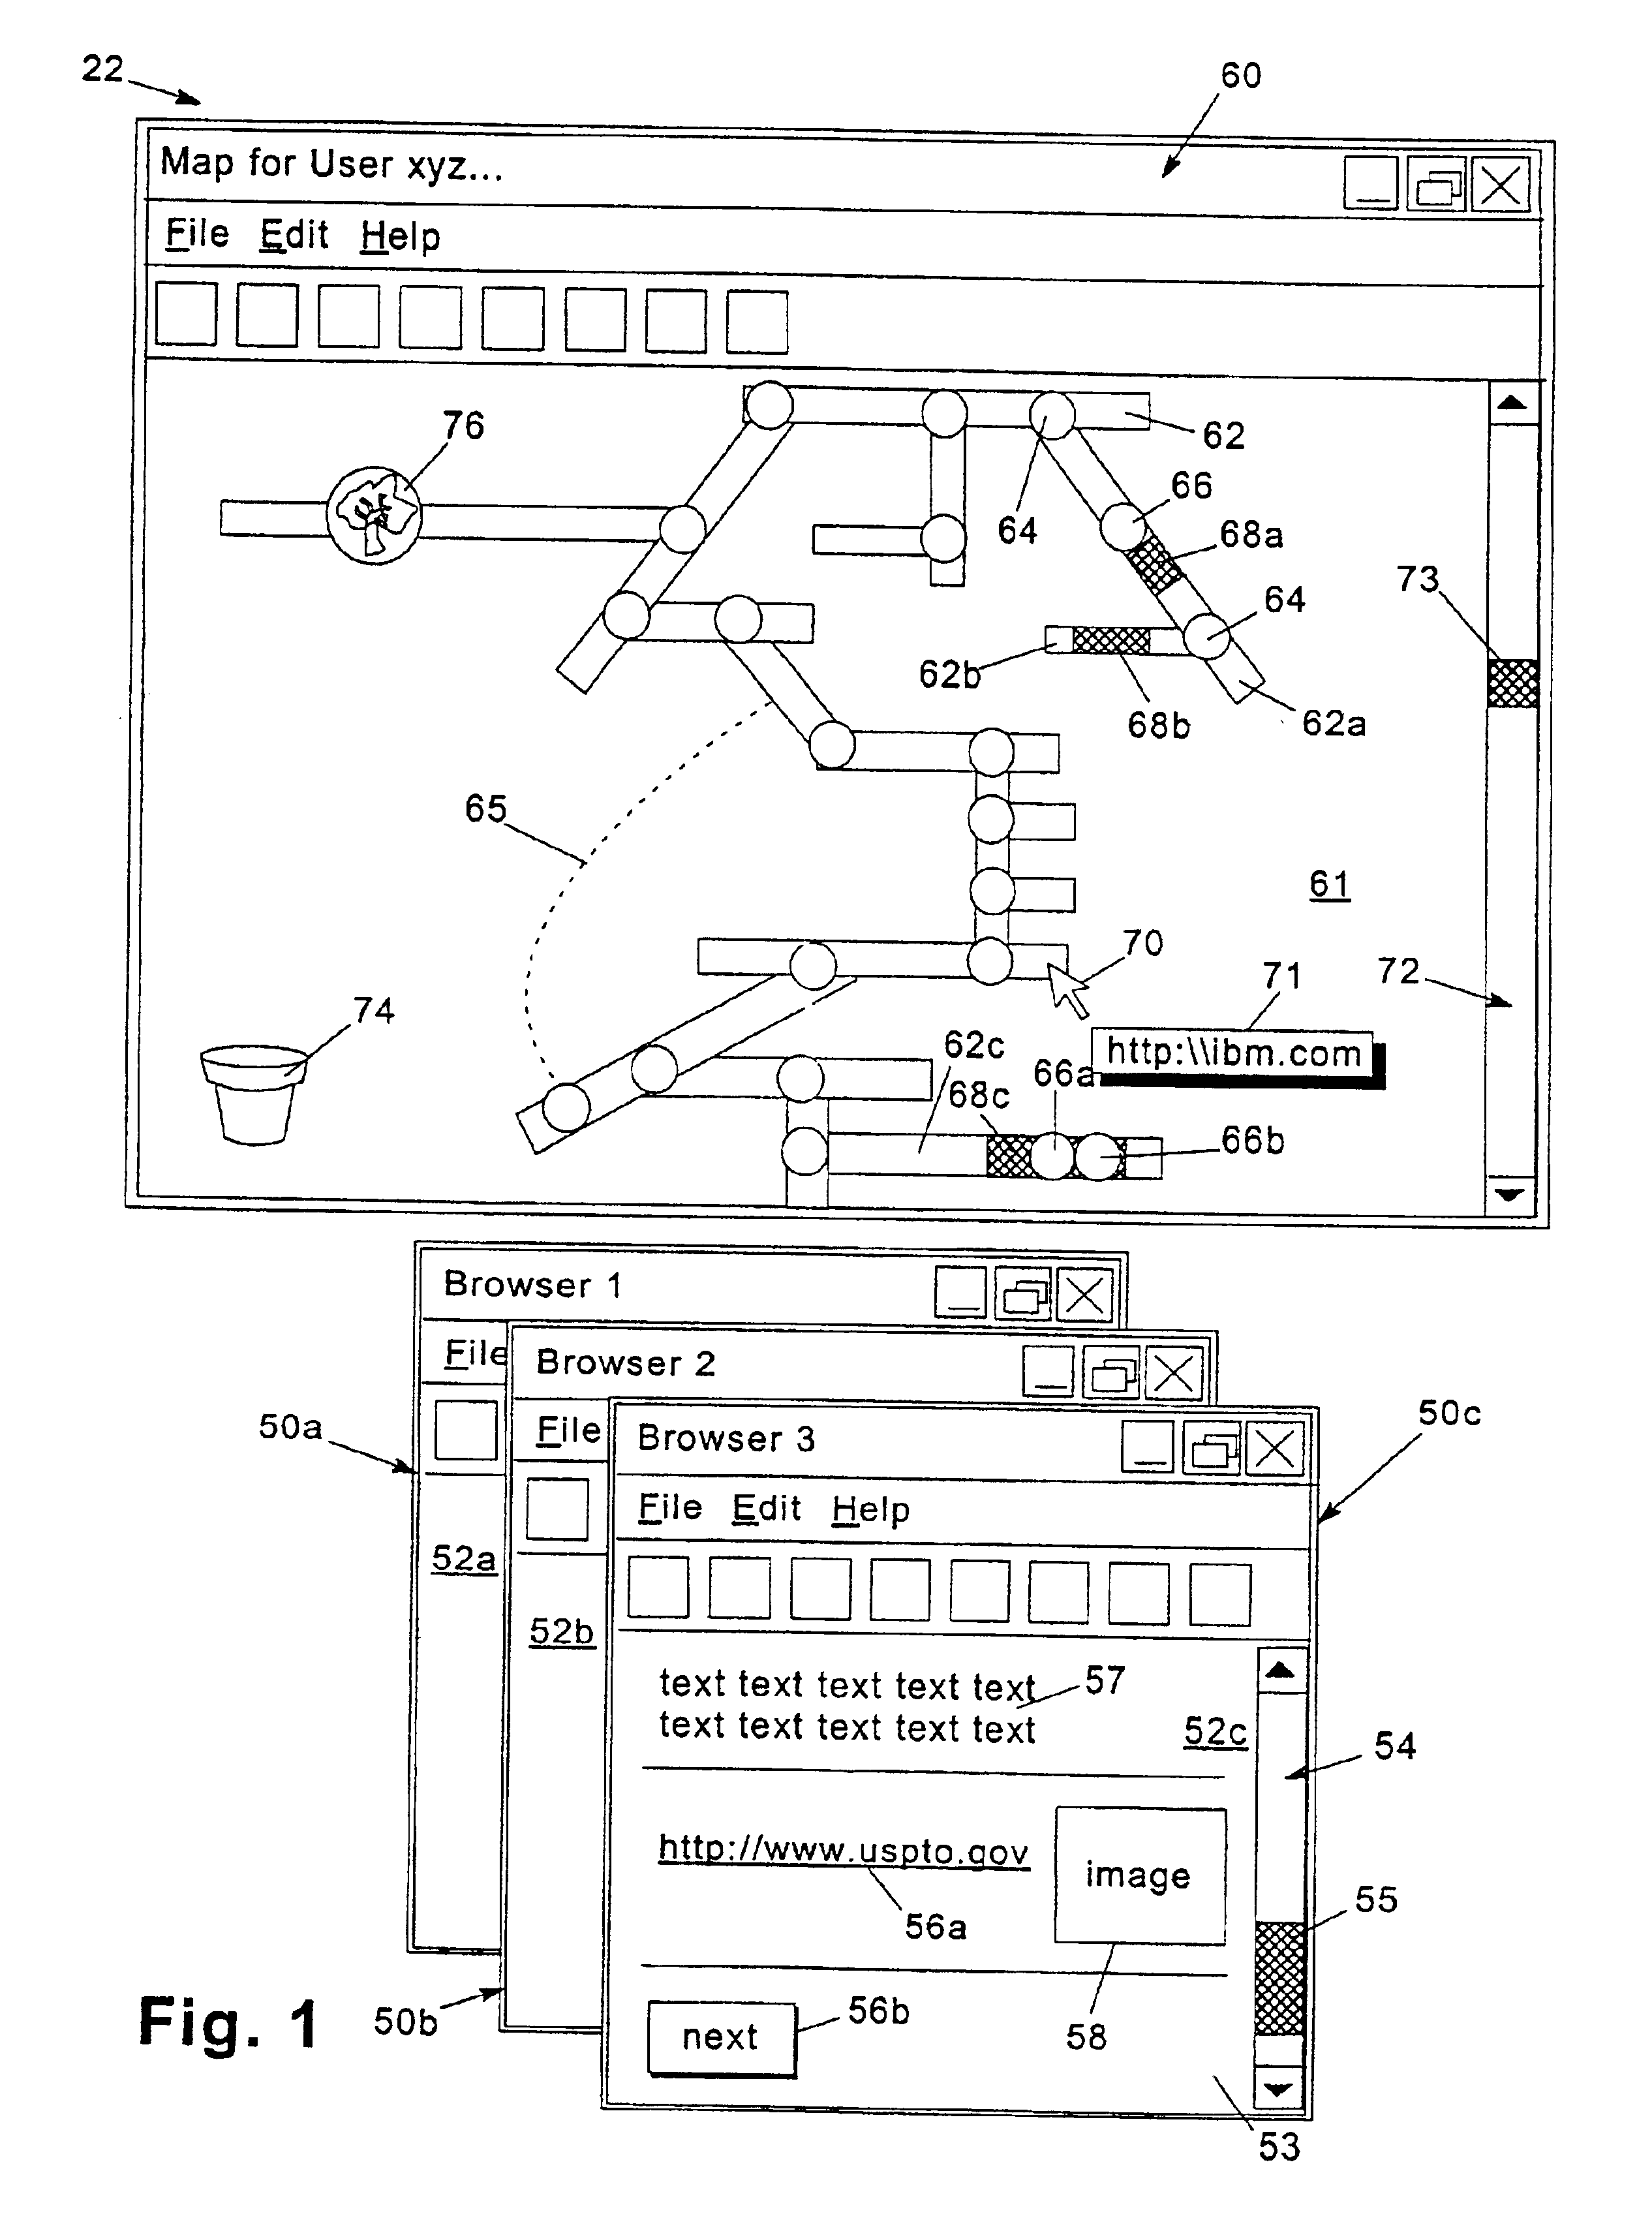 Multi-node user interface component and method thereof for use in performing a common operation on linked records